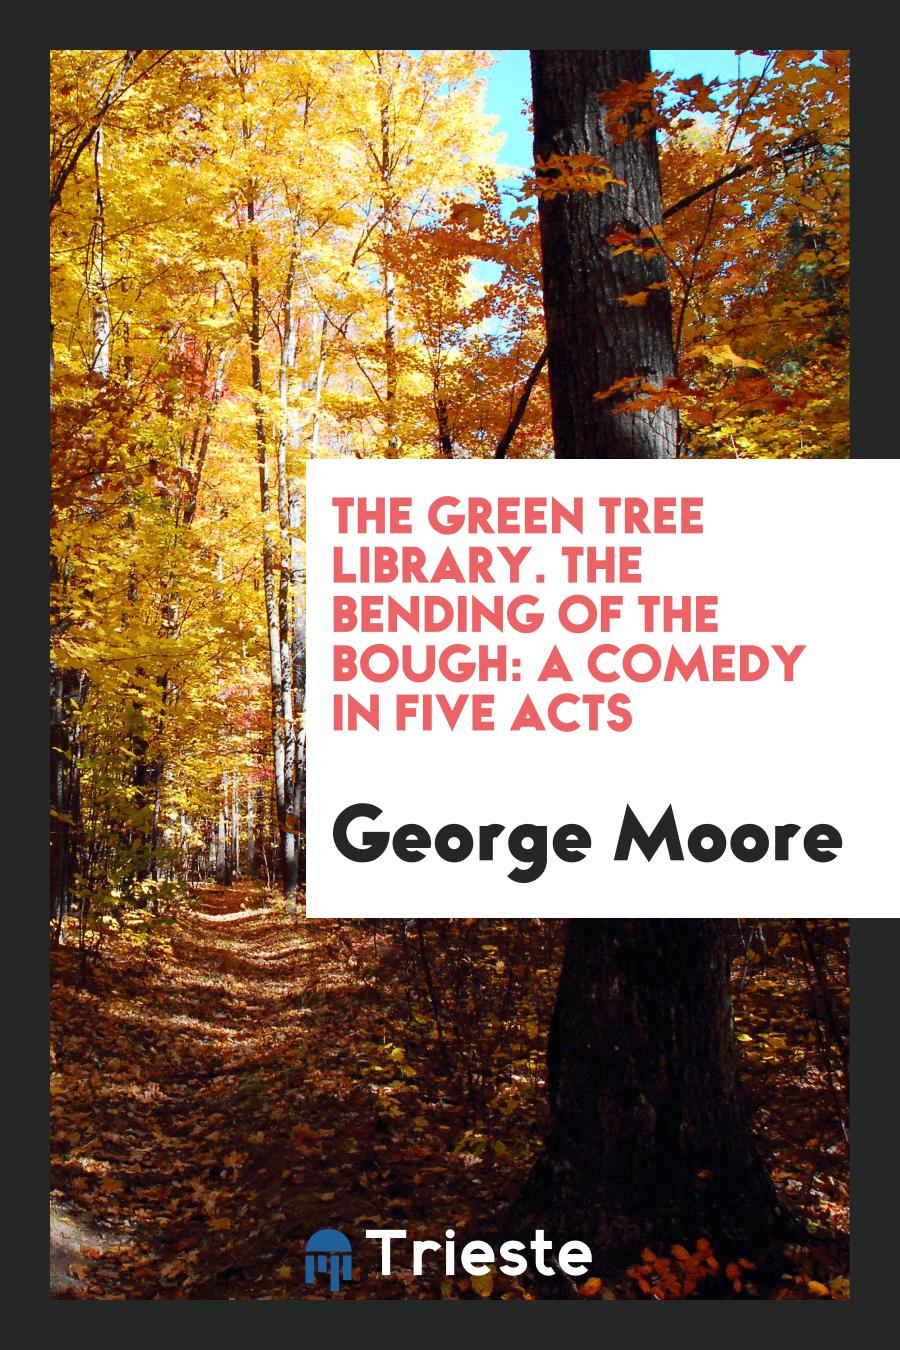 The Green Tree Library. The Bending of the Bough: A Comedy in Five Acts